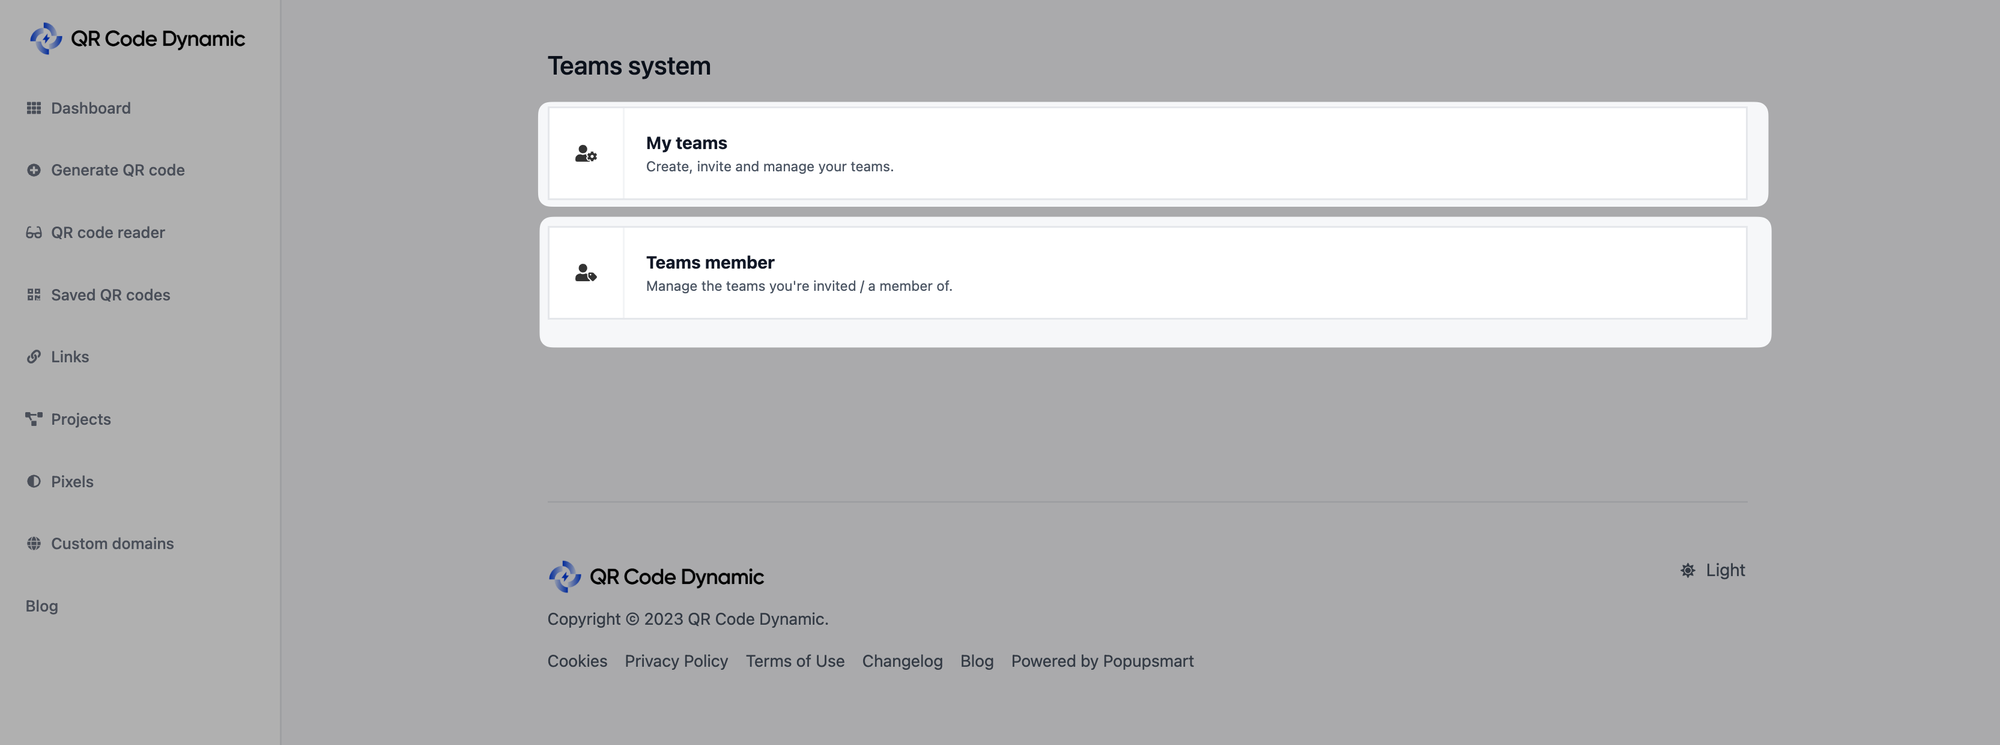 teams system page that shows my teams and team members